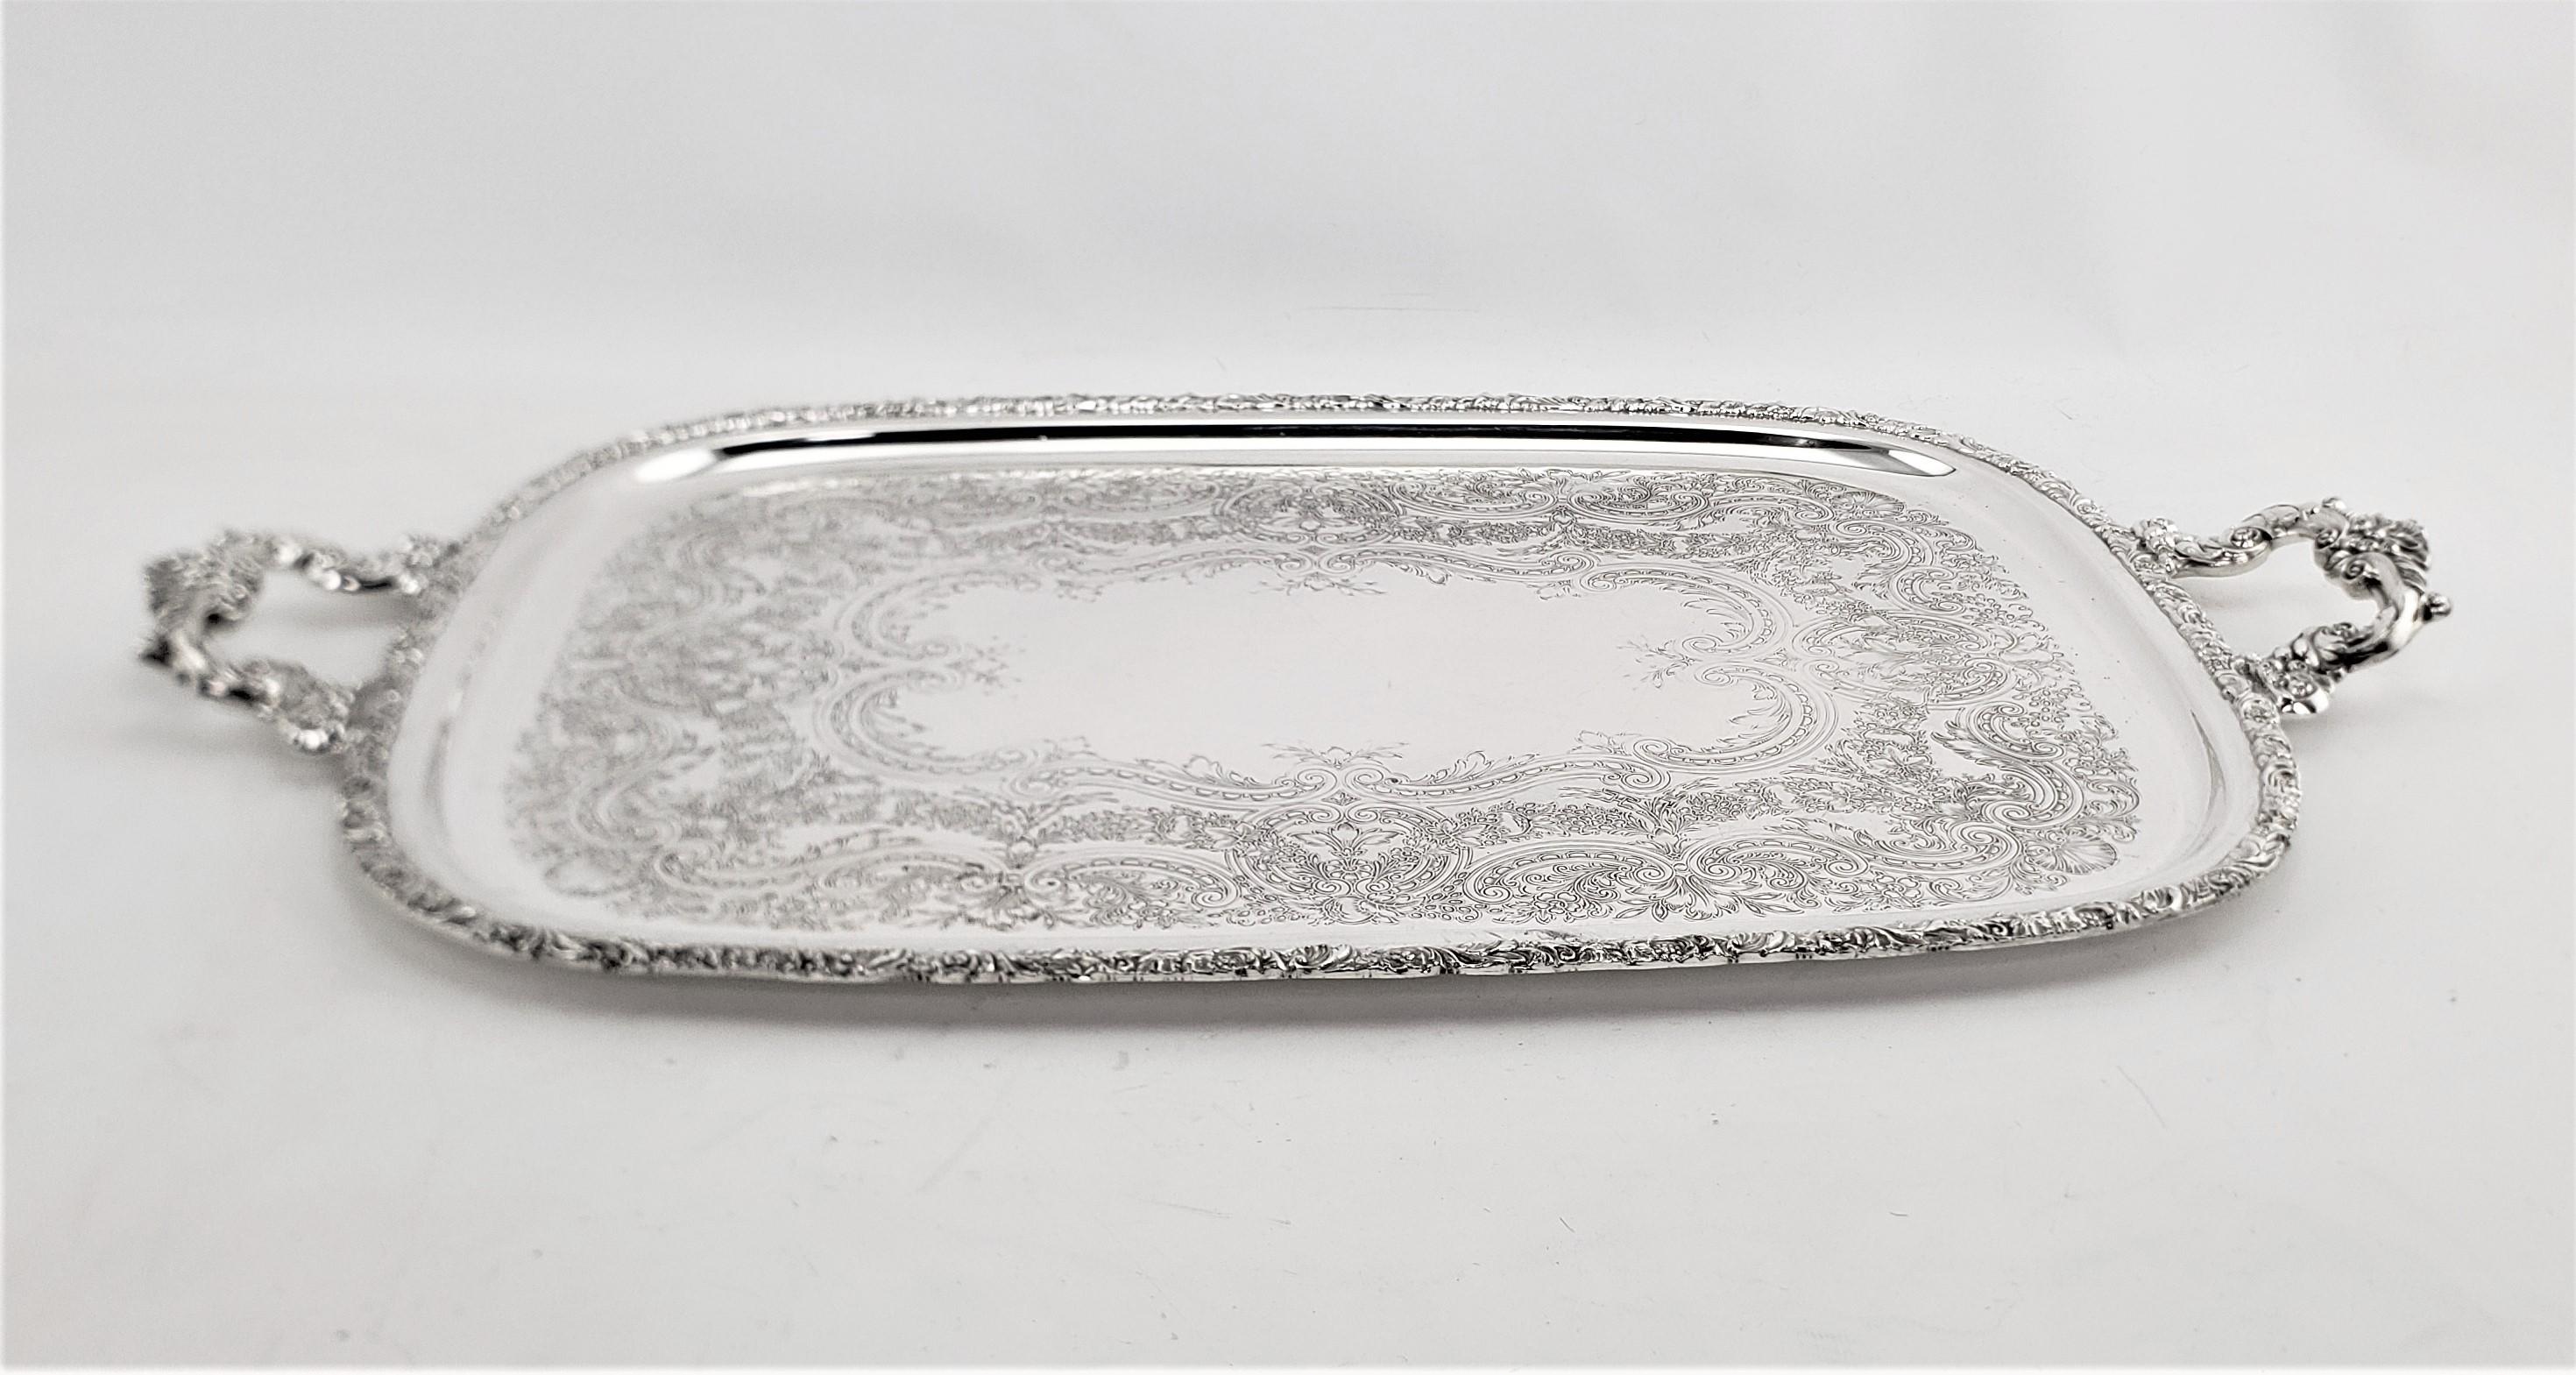 Large Antique English Silver Plated Serving Tray with Ornate Handles & Engraving 2